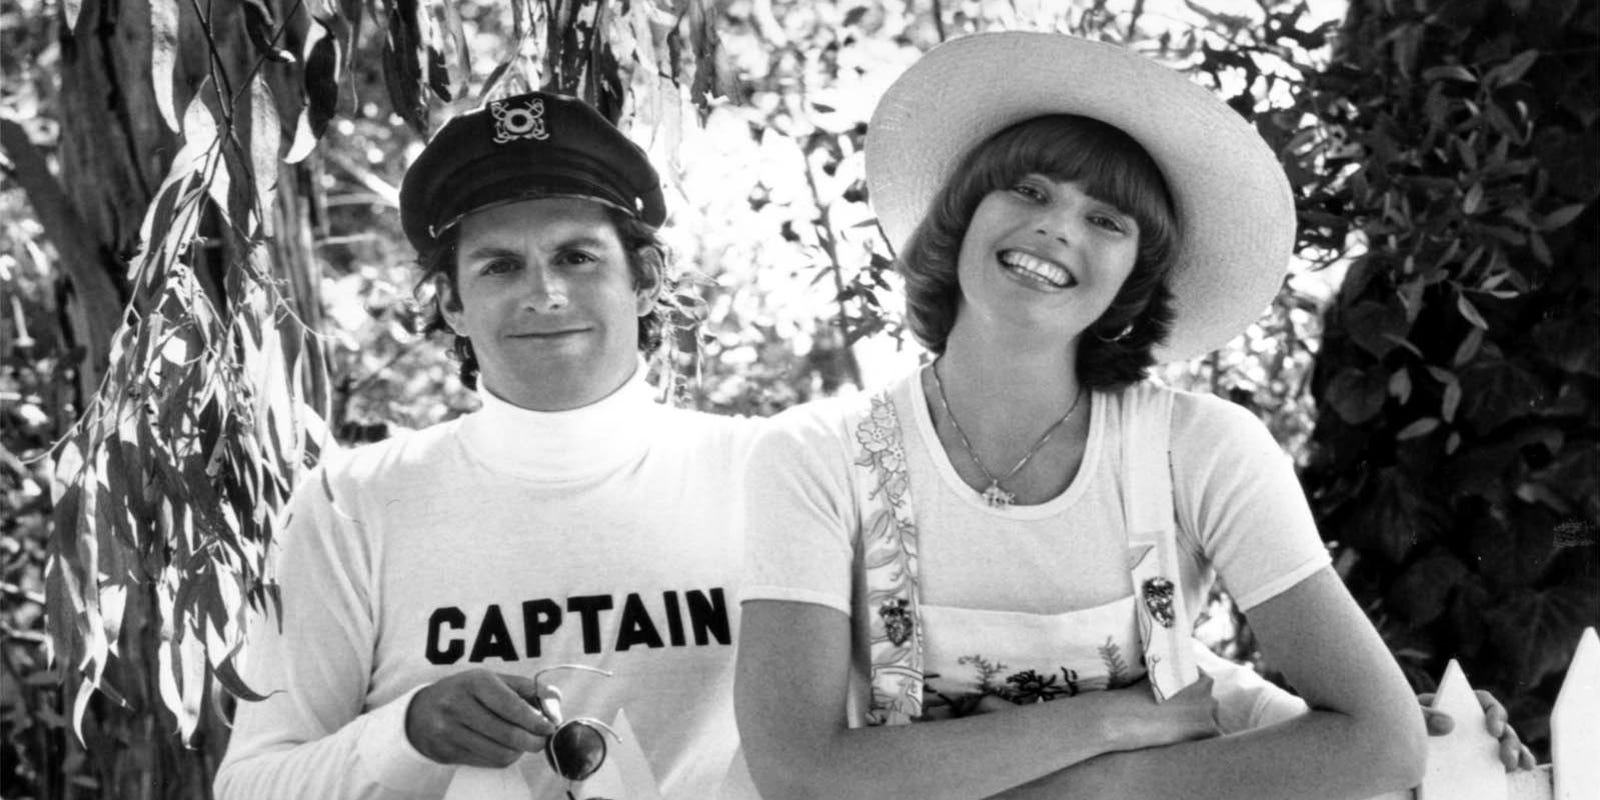 Twister Nude Beach House - Daryl Dragon of Captain & Tennille has died in Prescott at 76